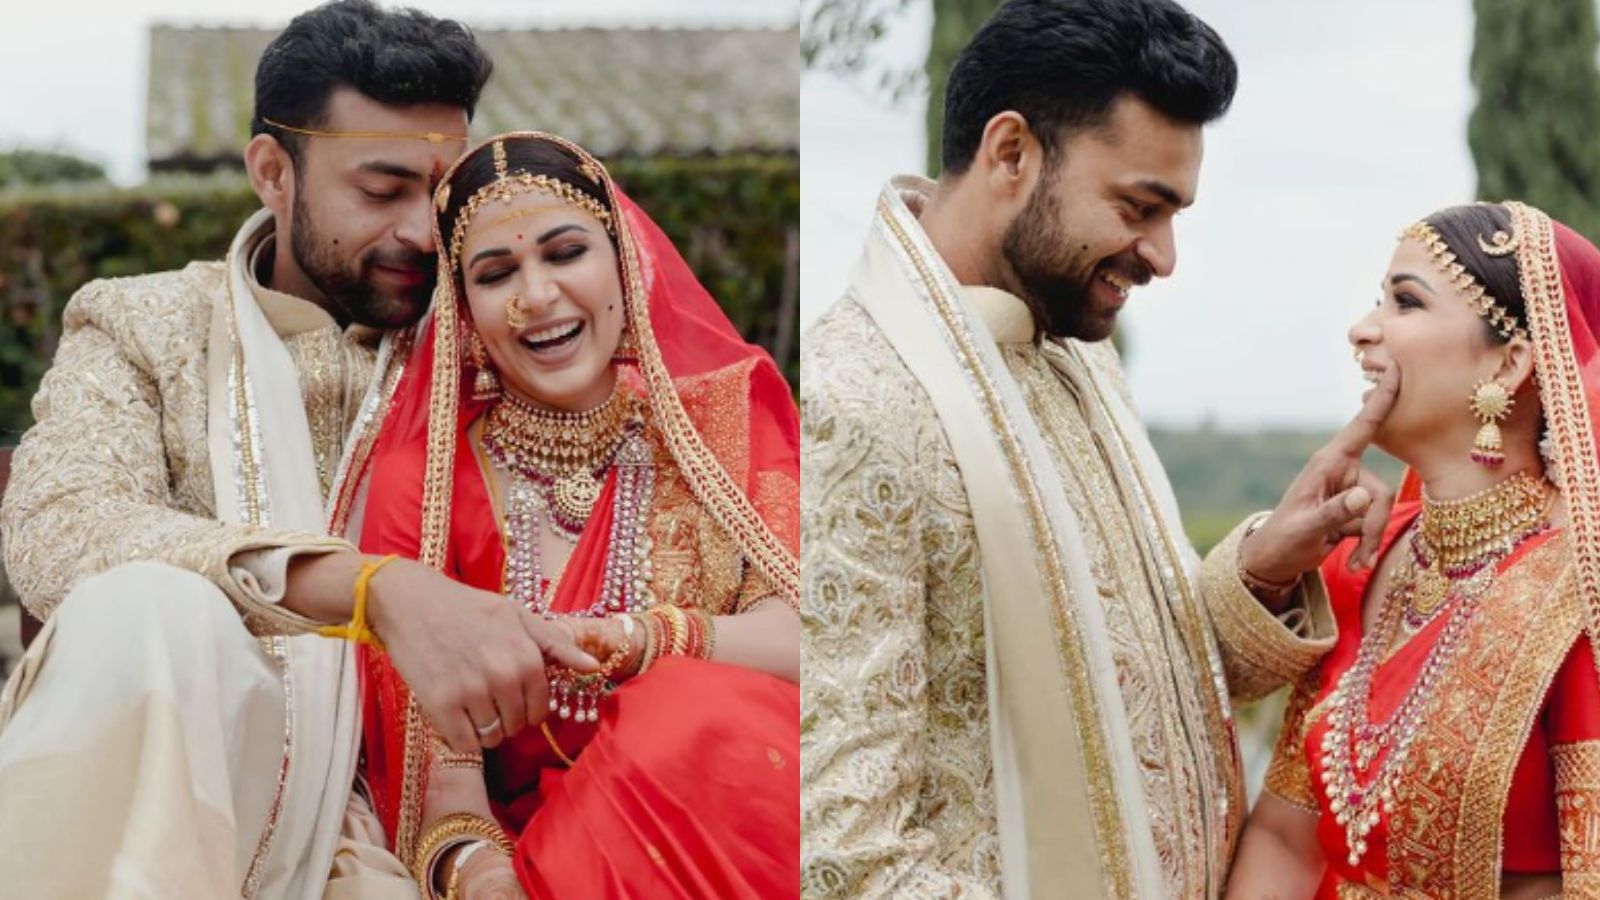 Varun Tej shares first pictures with wife Lavanya Tripathi: 'My Lav' | Telugu News - The Indian Express